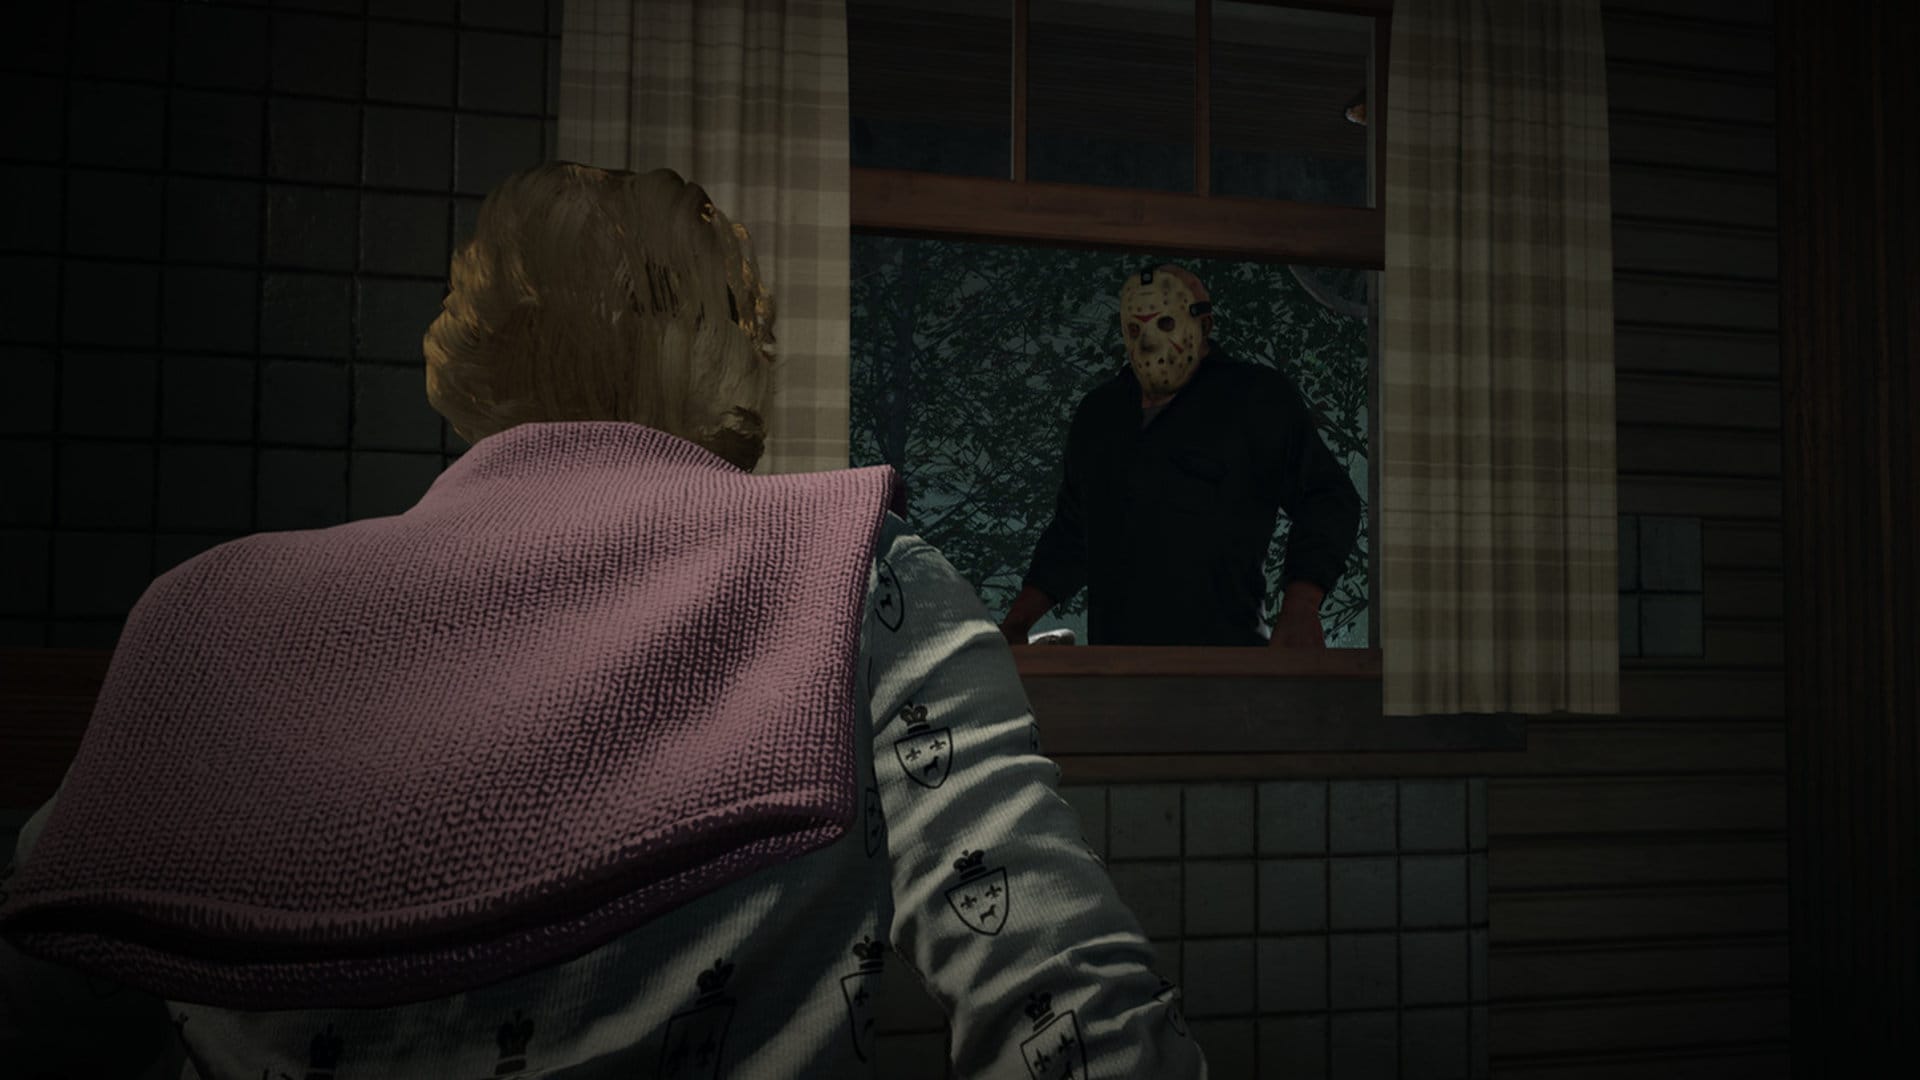 Friday the 13th: The Game Dev Reveals Cancelled Content, Including